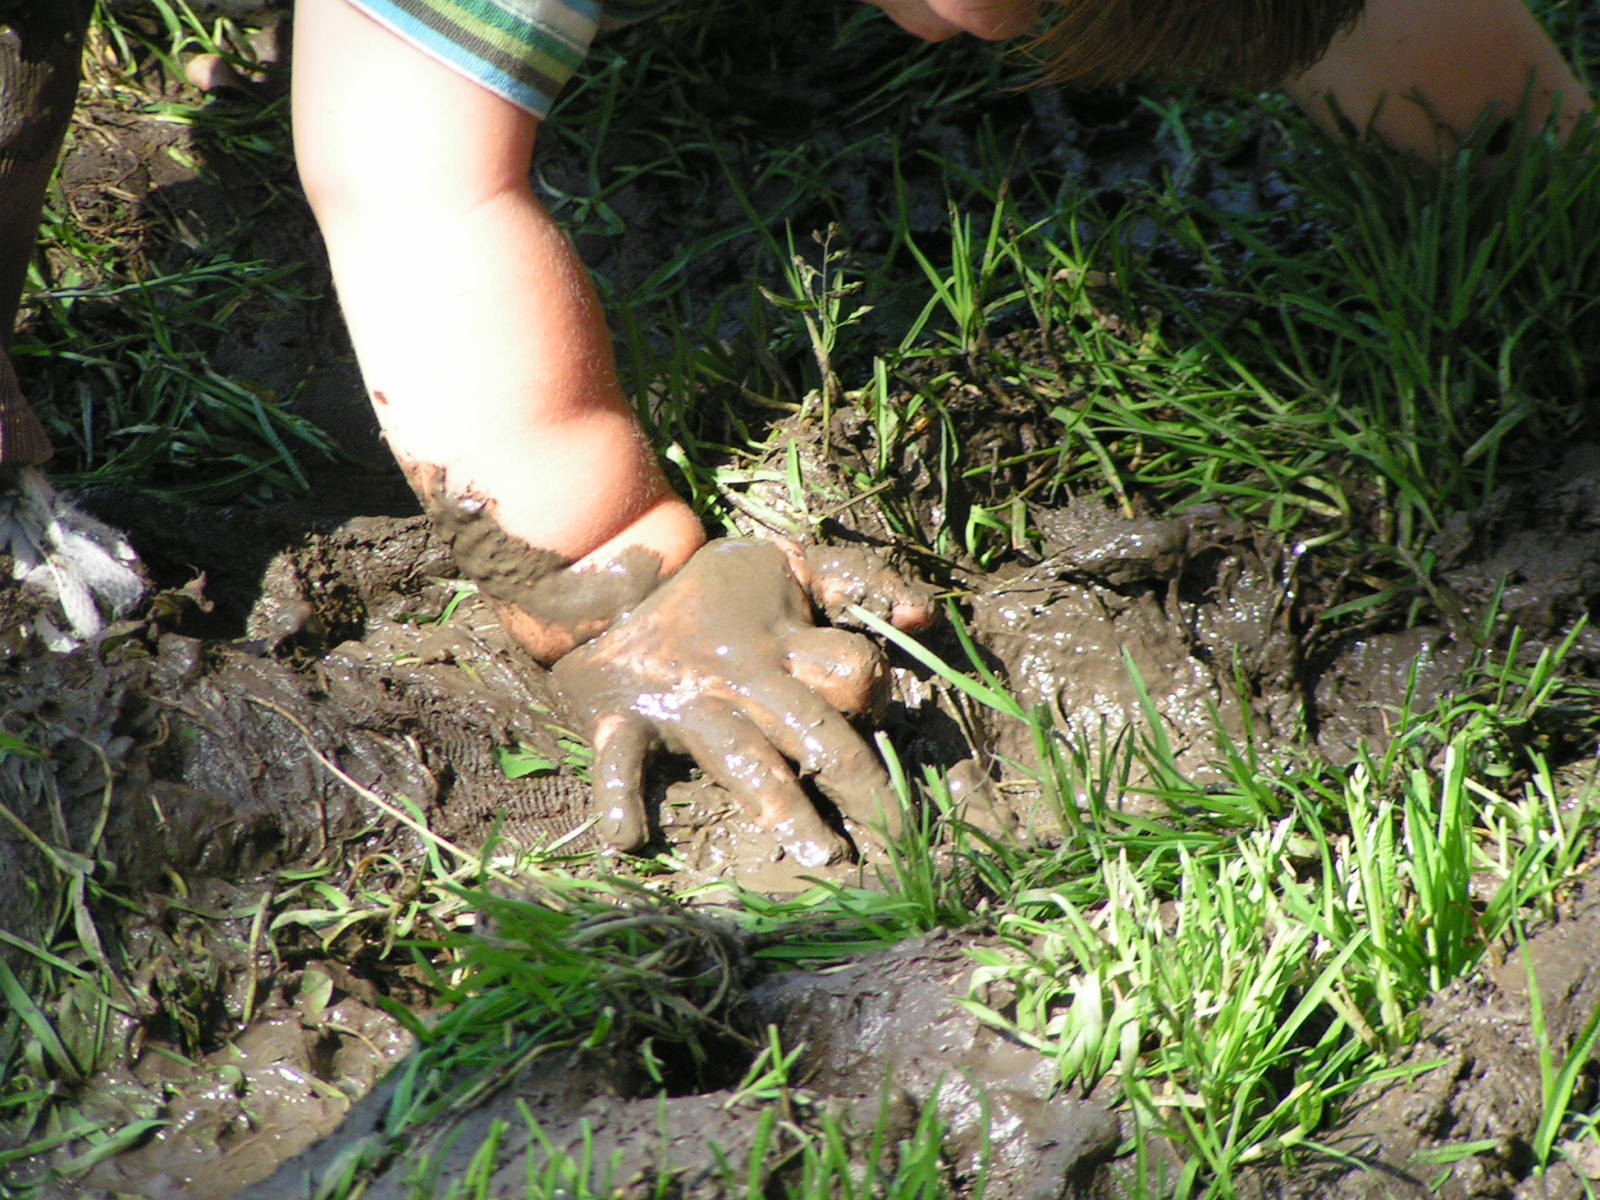 a young child playing in the mud